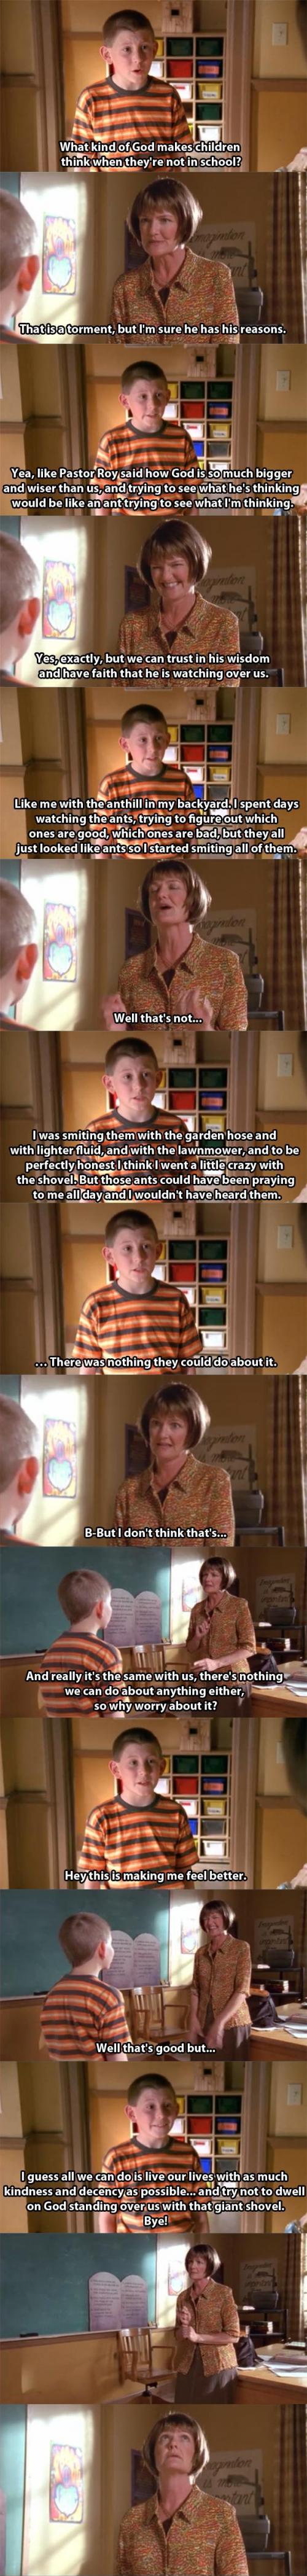 Perspective, brought to you by Malcolm in the Middle.